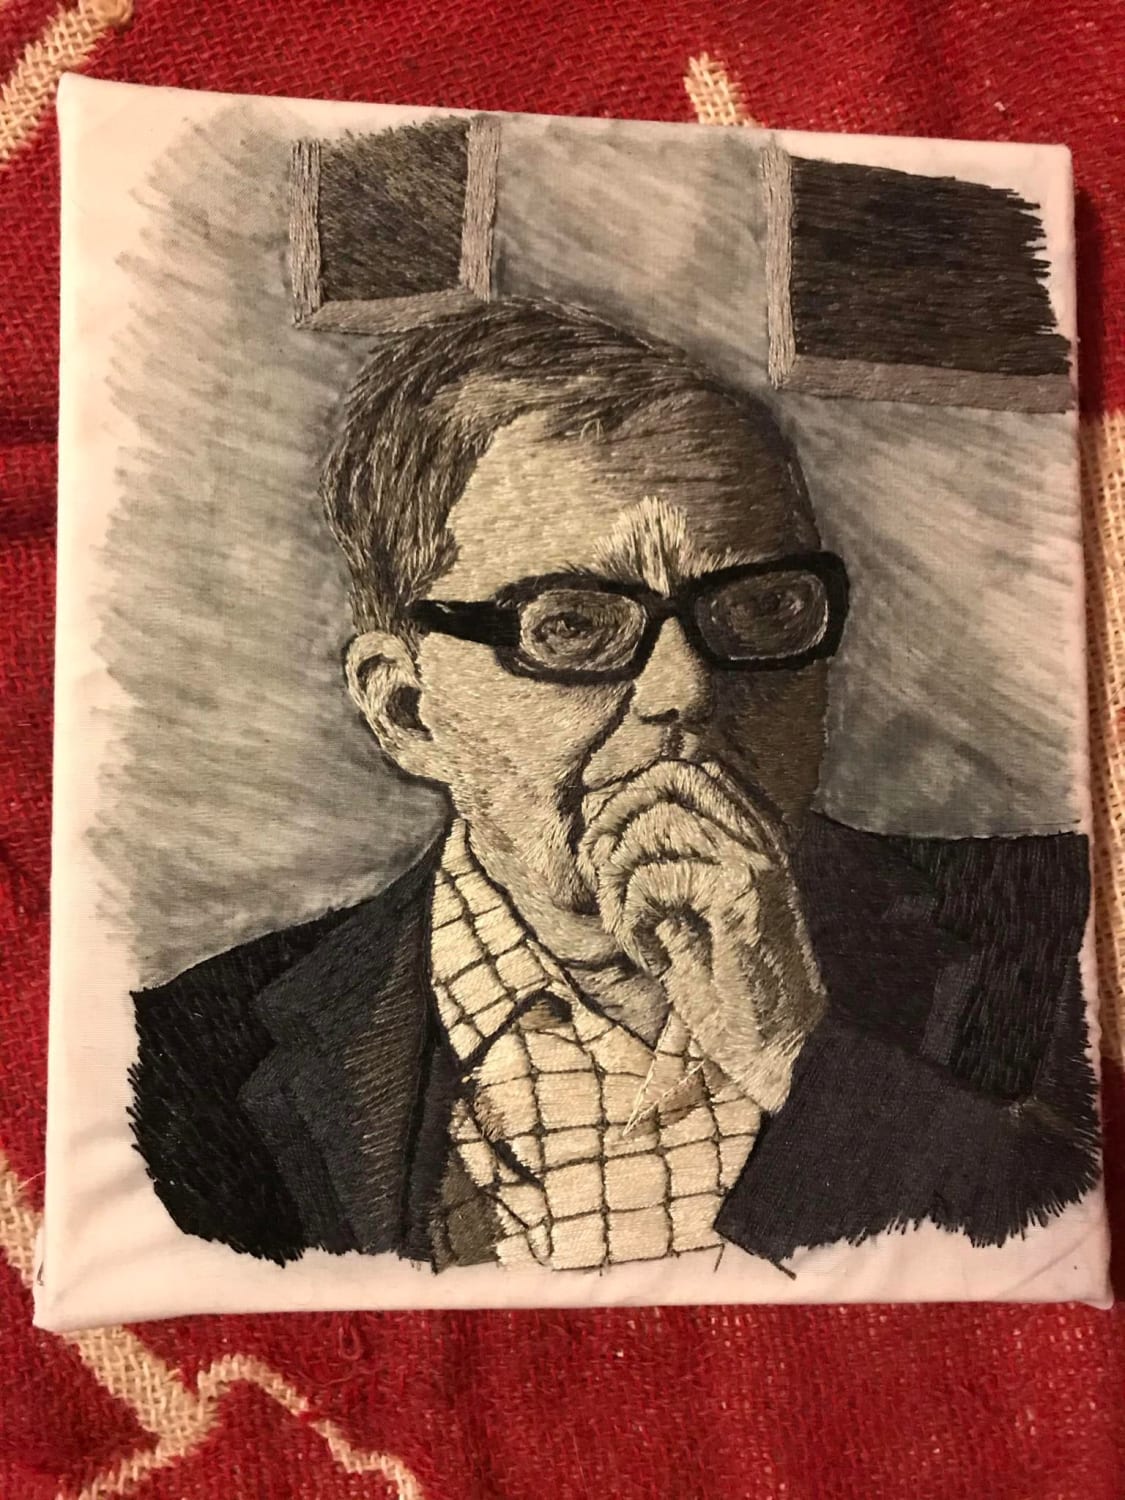 Shostakovich embroidery #4. I've shared these on the shostakovich sub but not here, and I've had a couple of inquiries about them, so here they are, starting with the most recent. Based on a photo from June, 1975. All done with one strand of silk embroidery thread using needlepainting techniques.